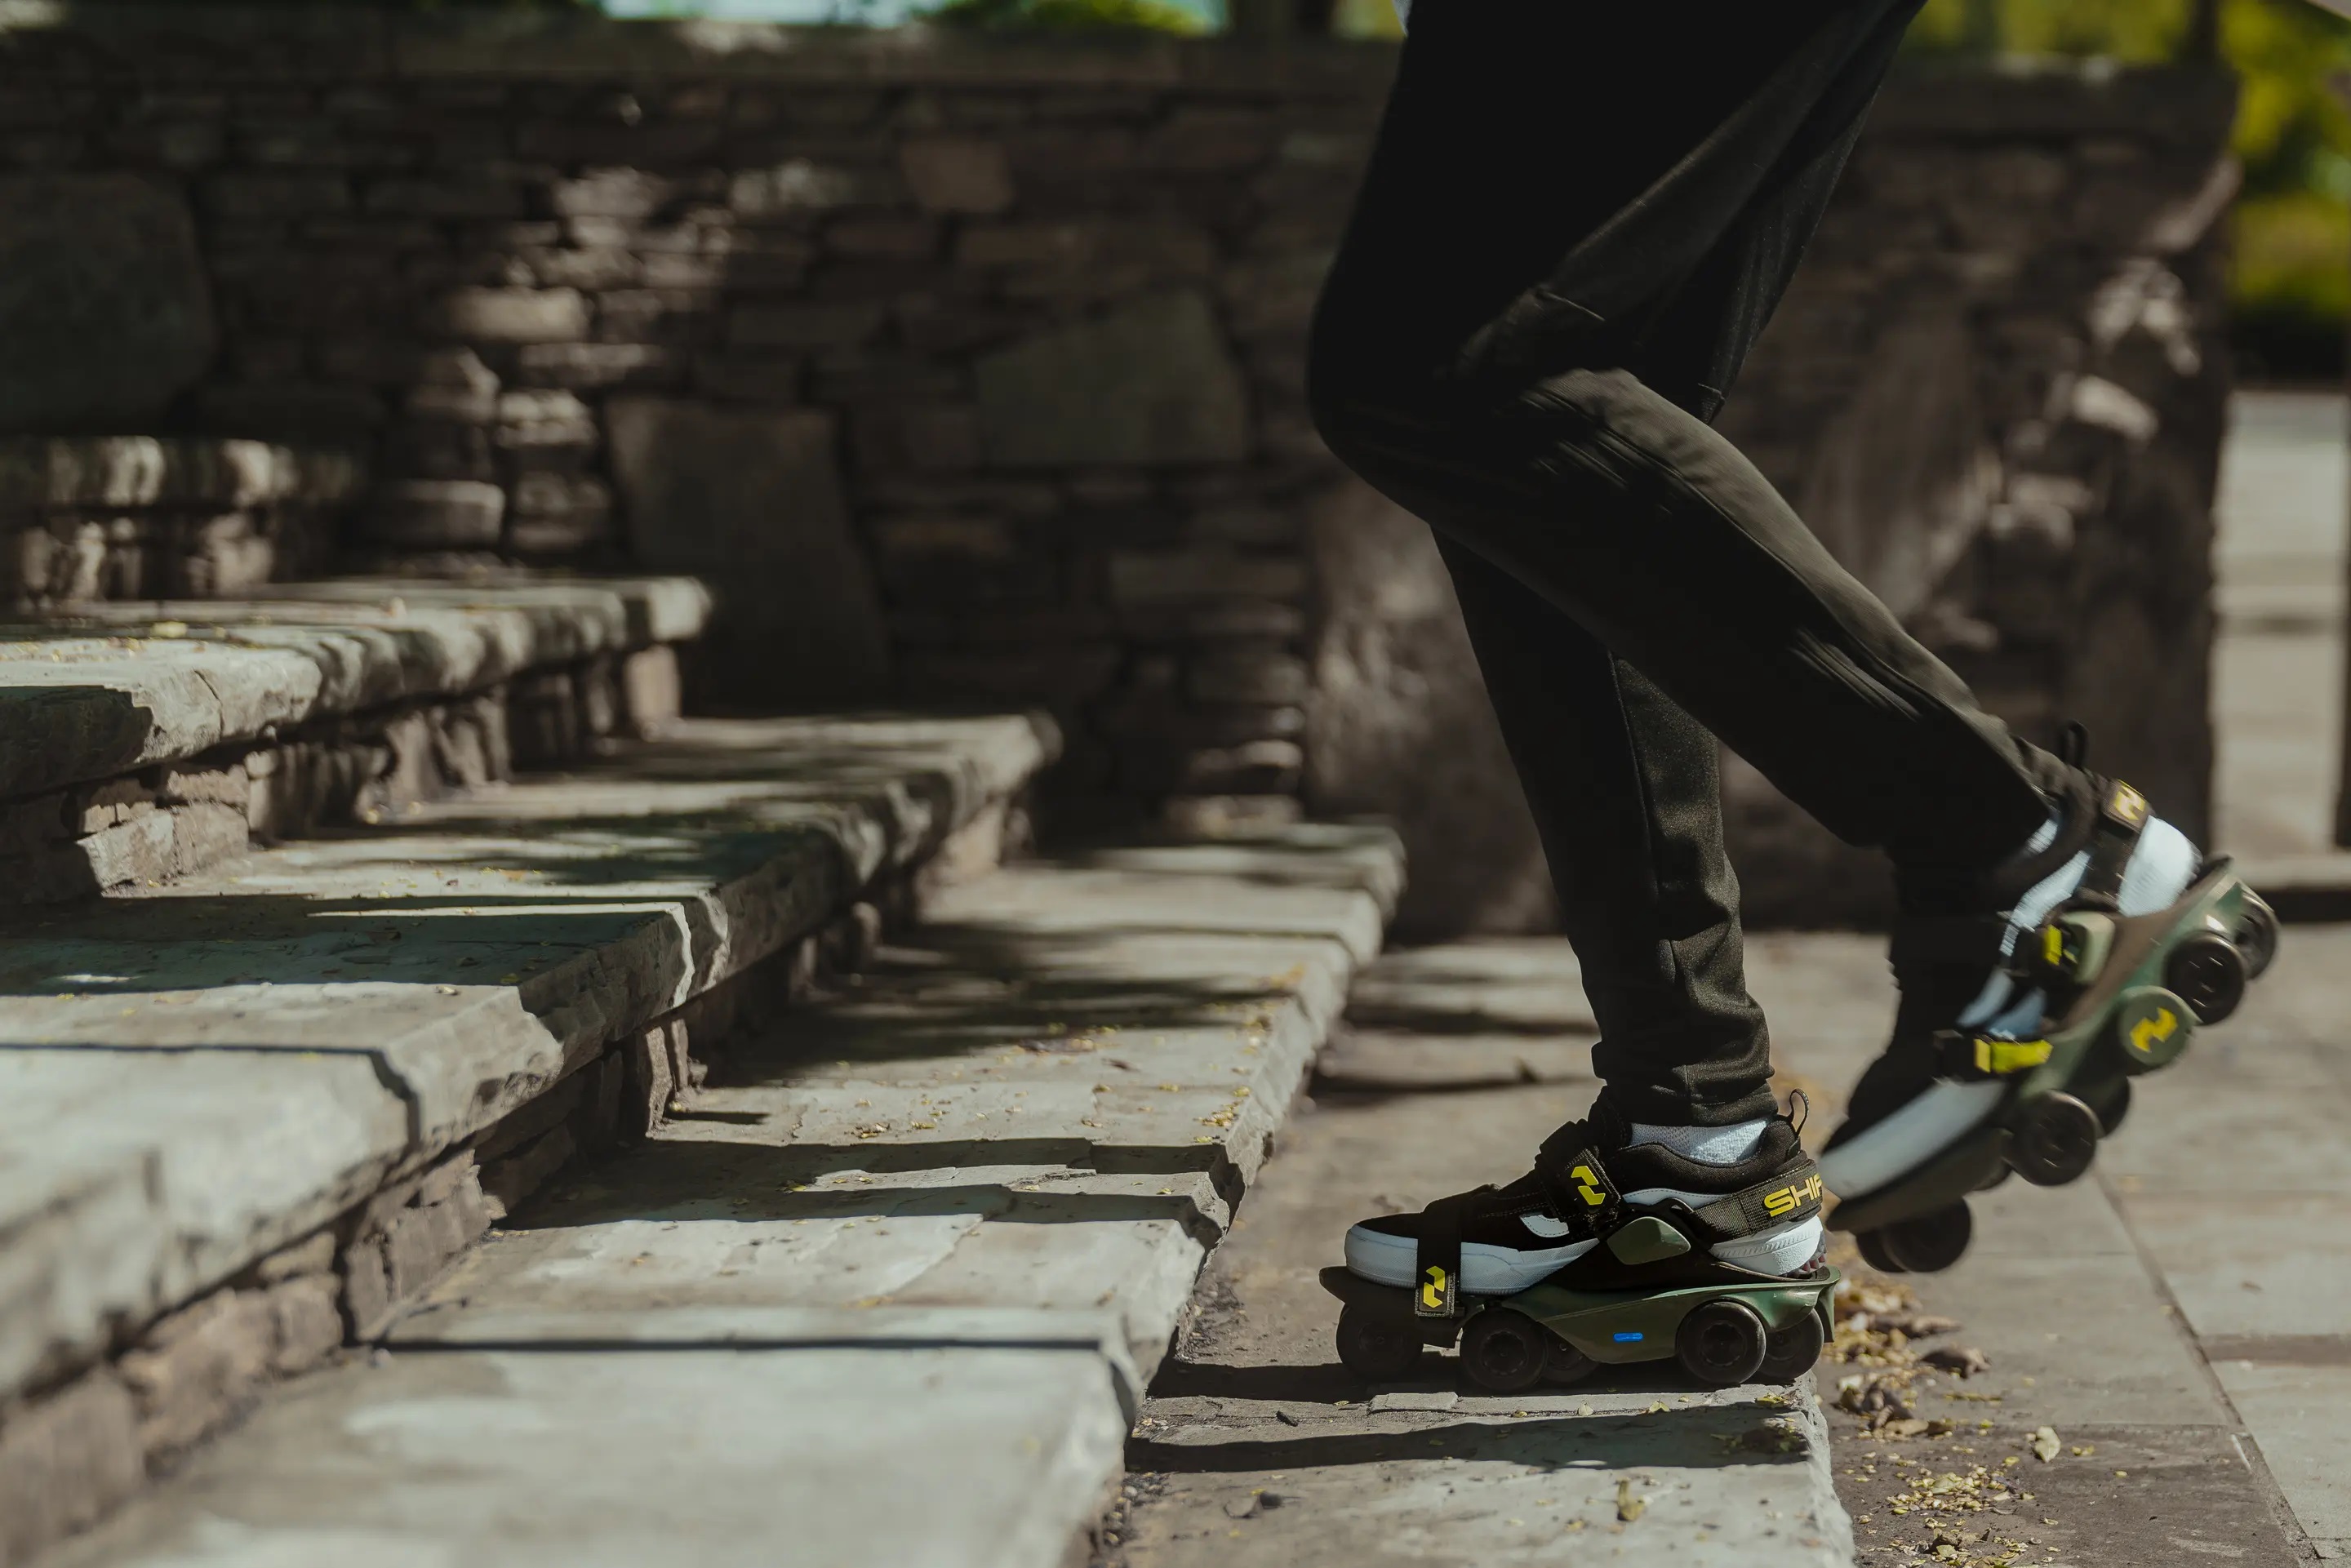 Stumble Minimal on The world's fastest shoes: Moonwalkers - electric-powered roller skates  that increase walking speed by 250% - are available on Kickstarter |  gagadget.com